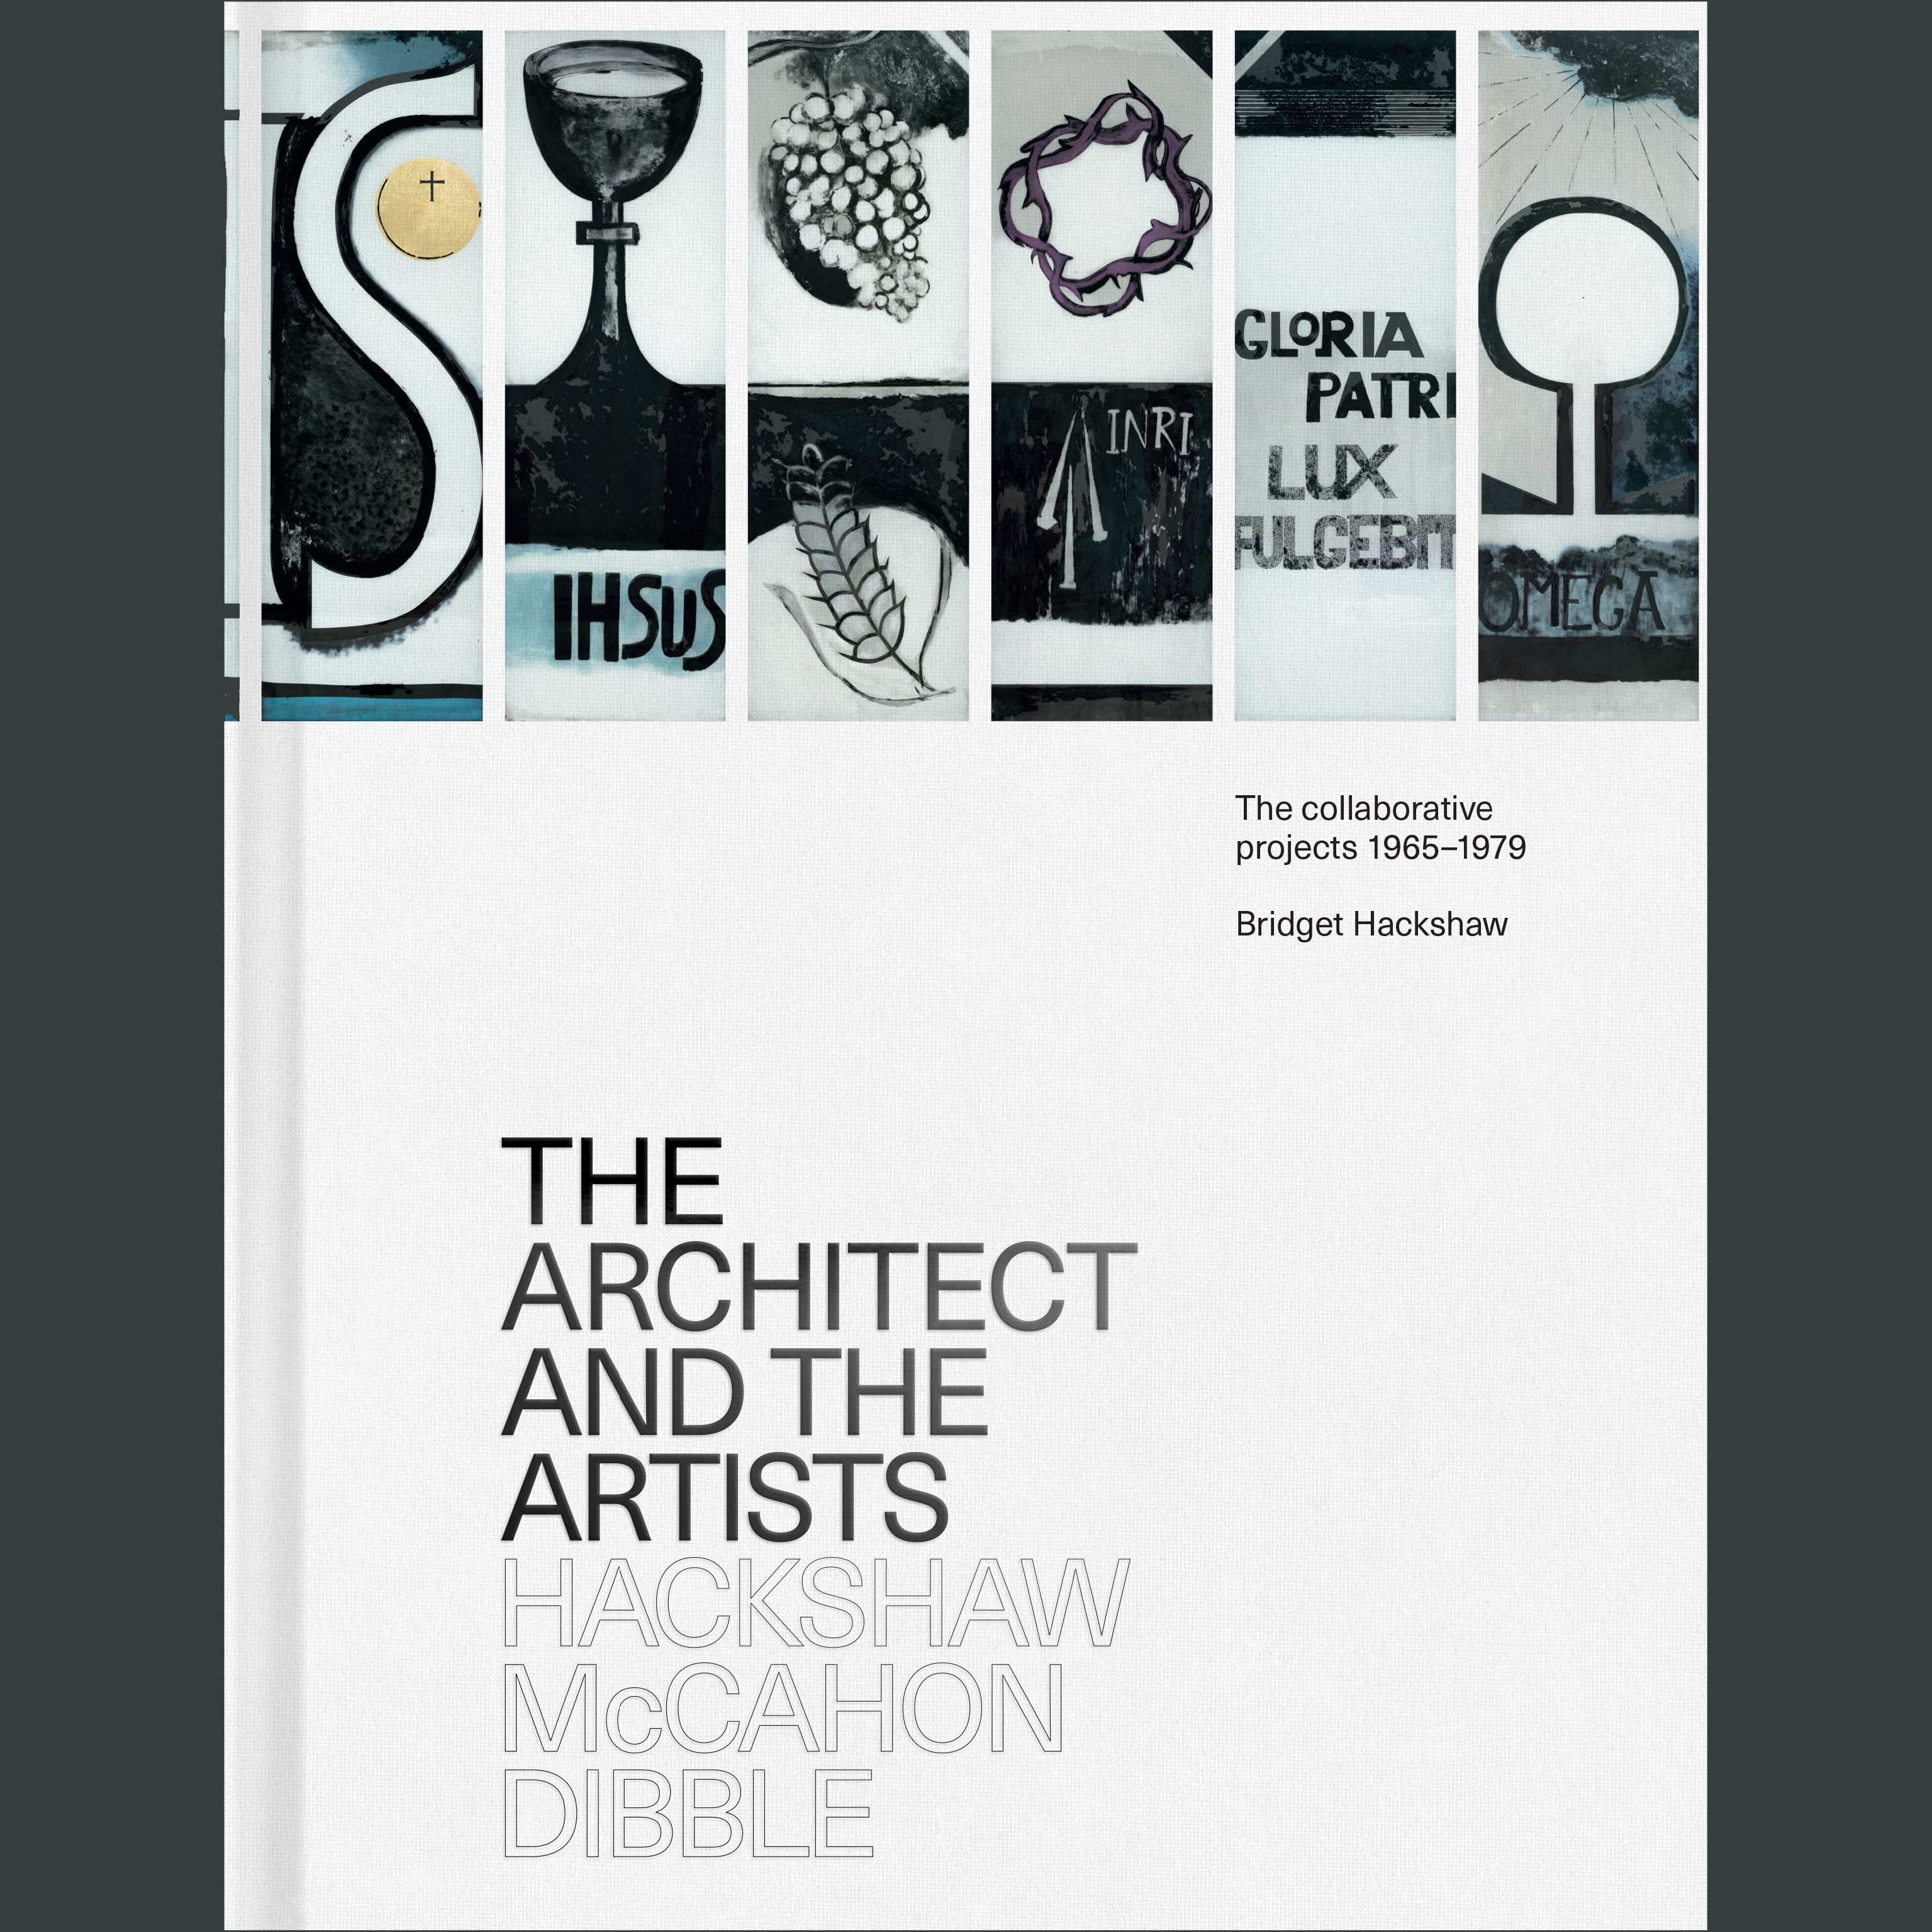 Book event: The Architect and the Artists